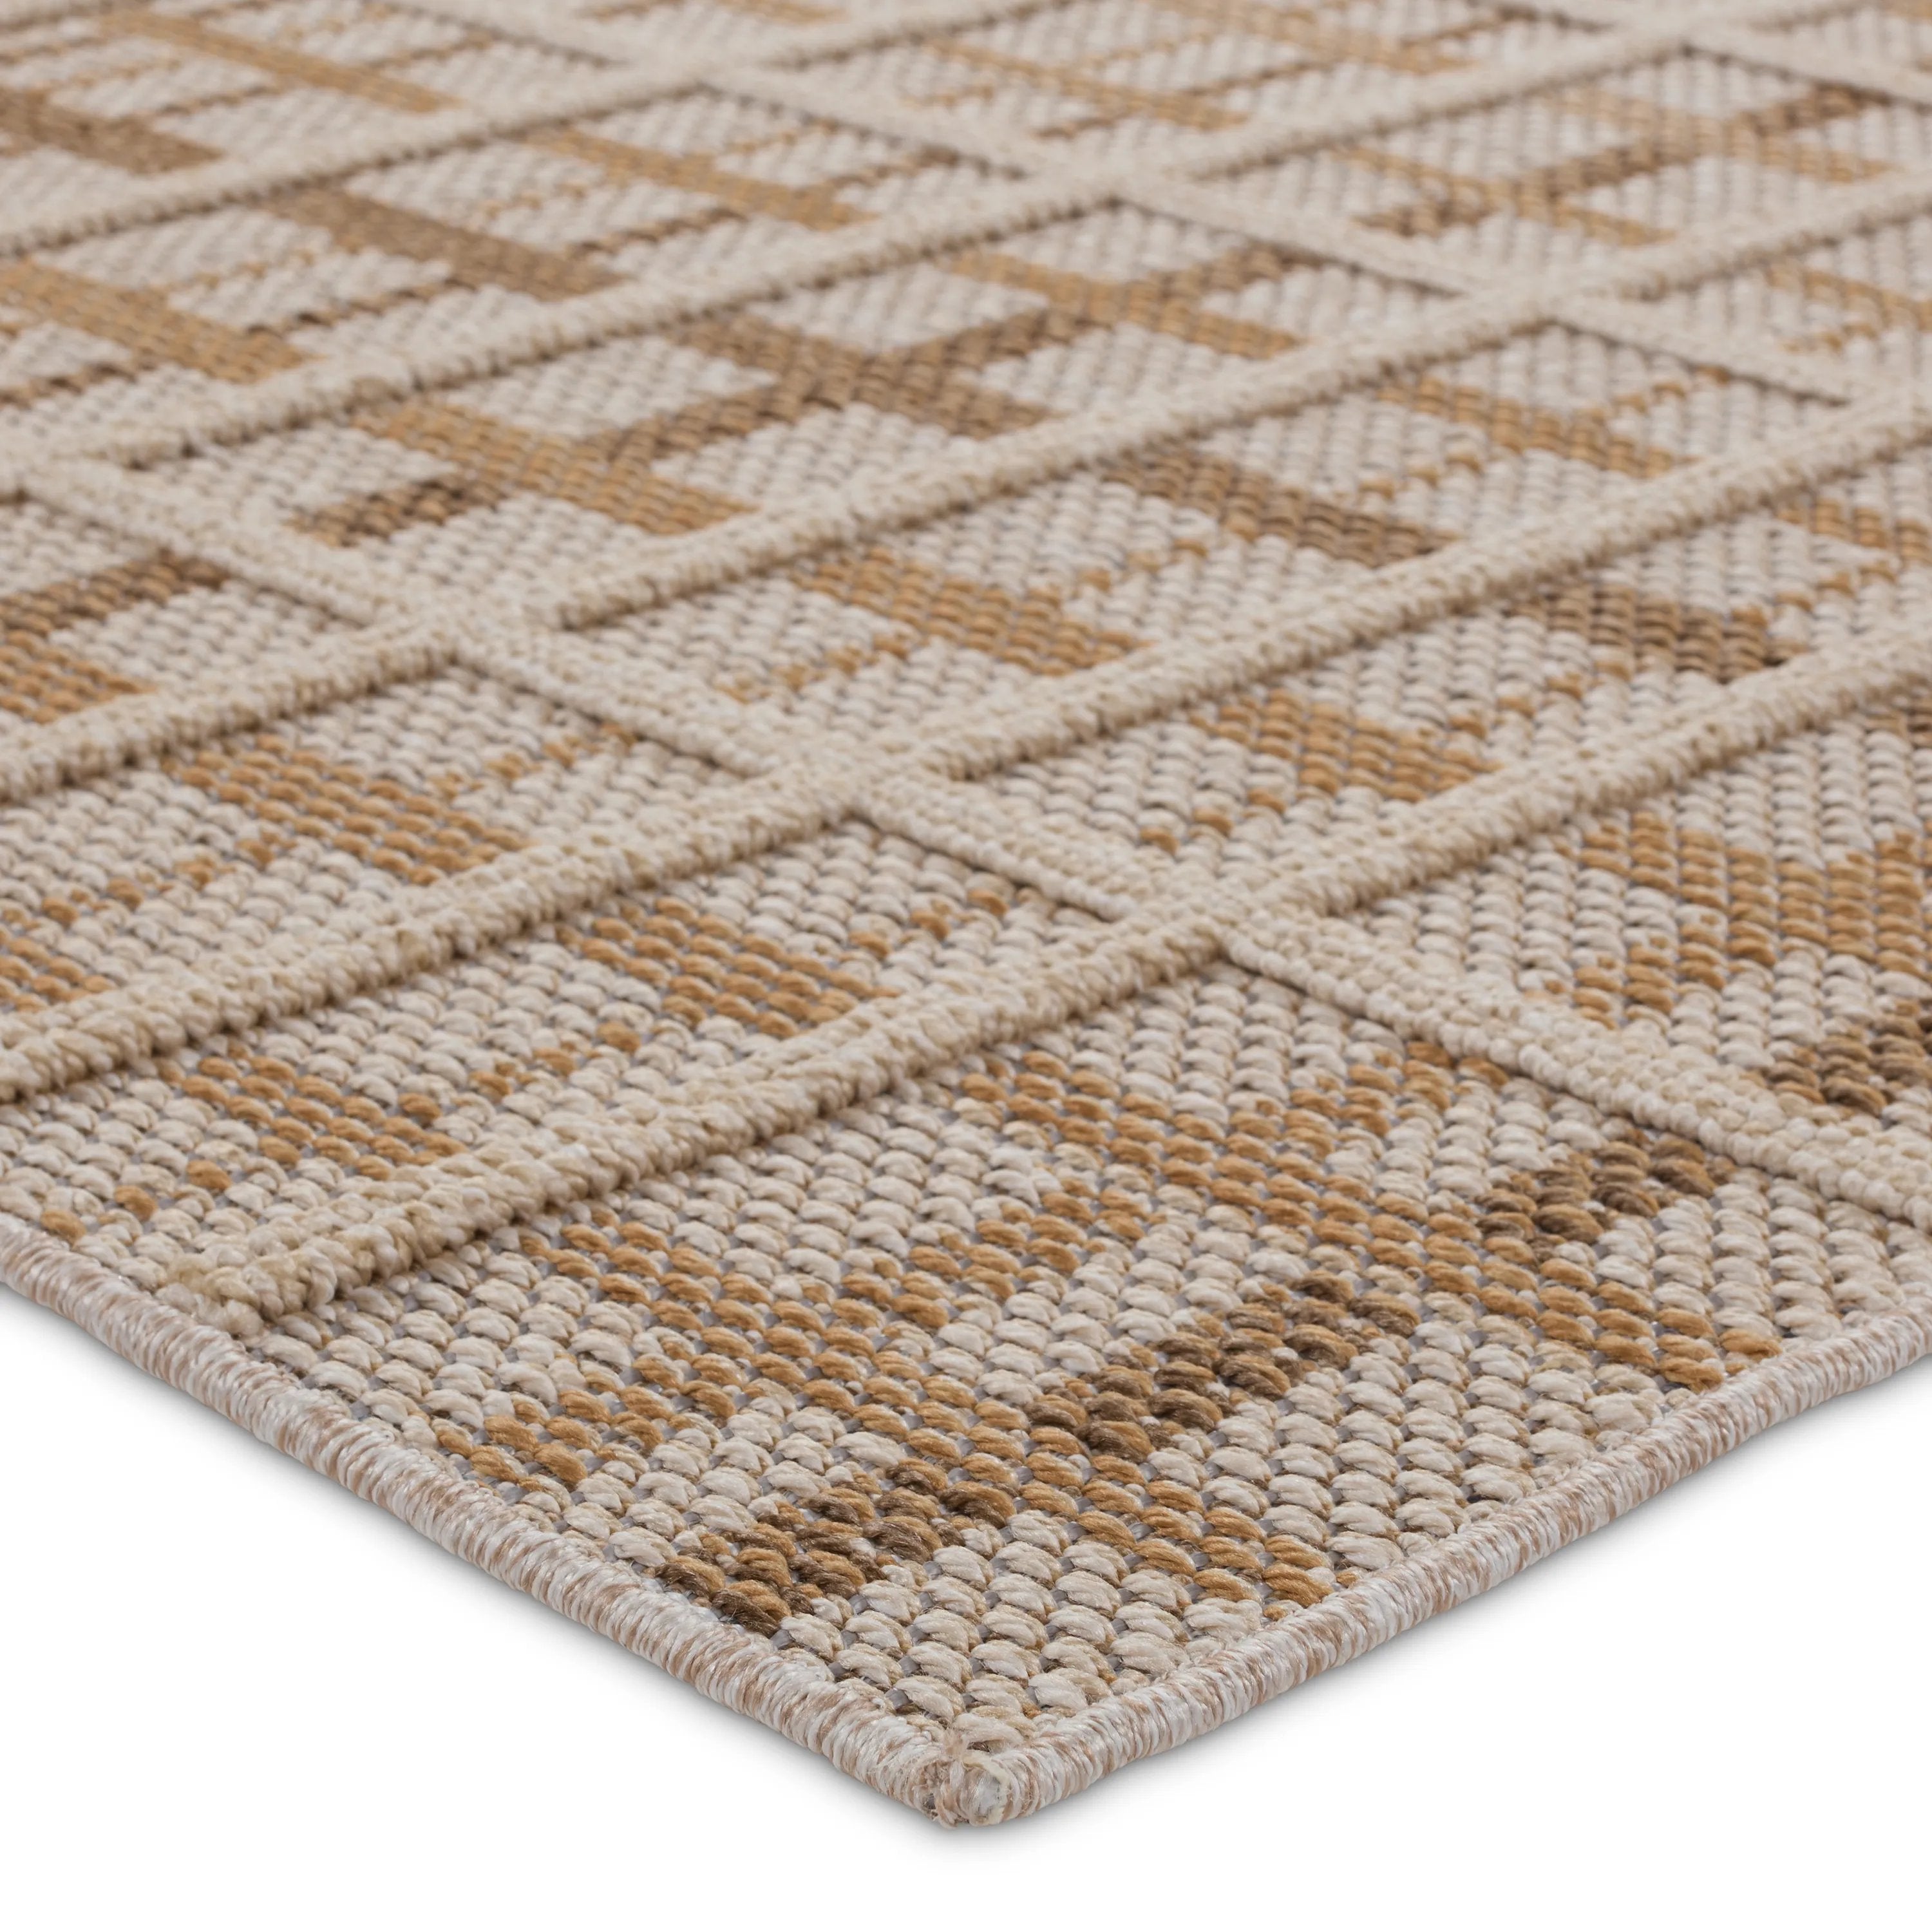 The indoor-outdoor Paradizo collection features durable, weather-resistant fibers that create a flatwoven, natural look. Emanating the colors and tone of grass fibers, the Cecily rug boasts a neutral, grounding palette. The textural grid design paired with the colorway of brown and cream highlight the easily styled nature of this accent piece. Amethyst Home provides interior design, new home construction design consulting, vintage area rugs, and lighting in the Washington metro area.